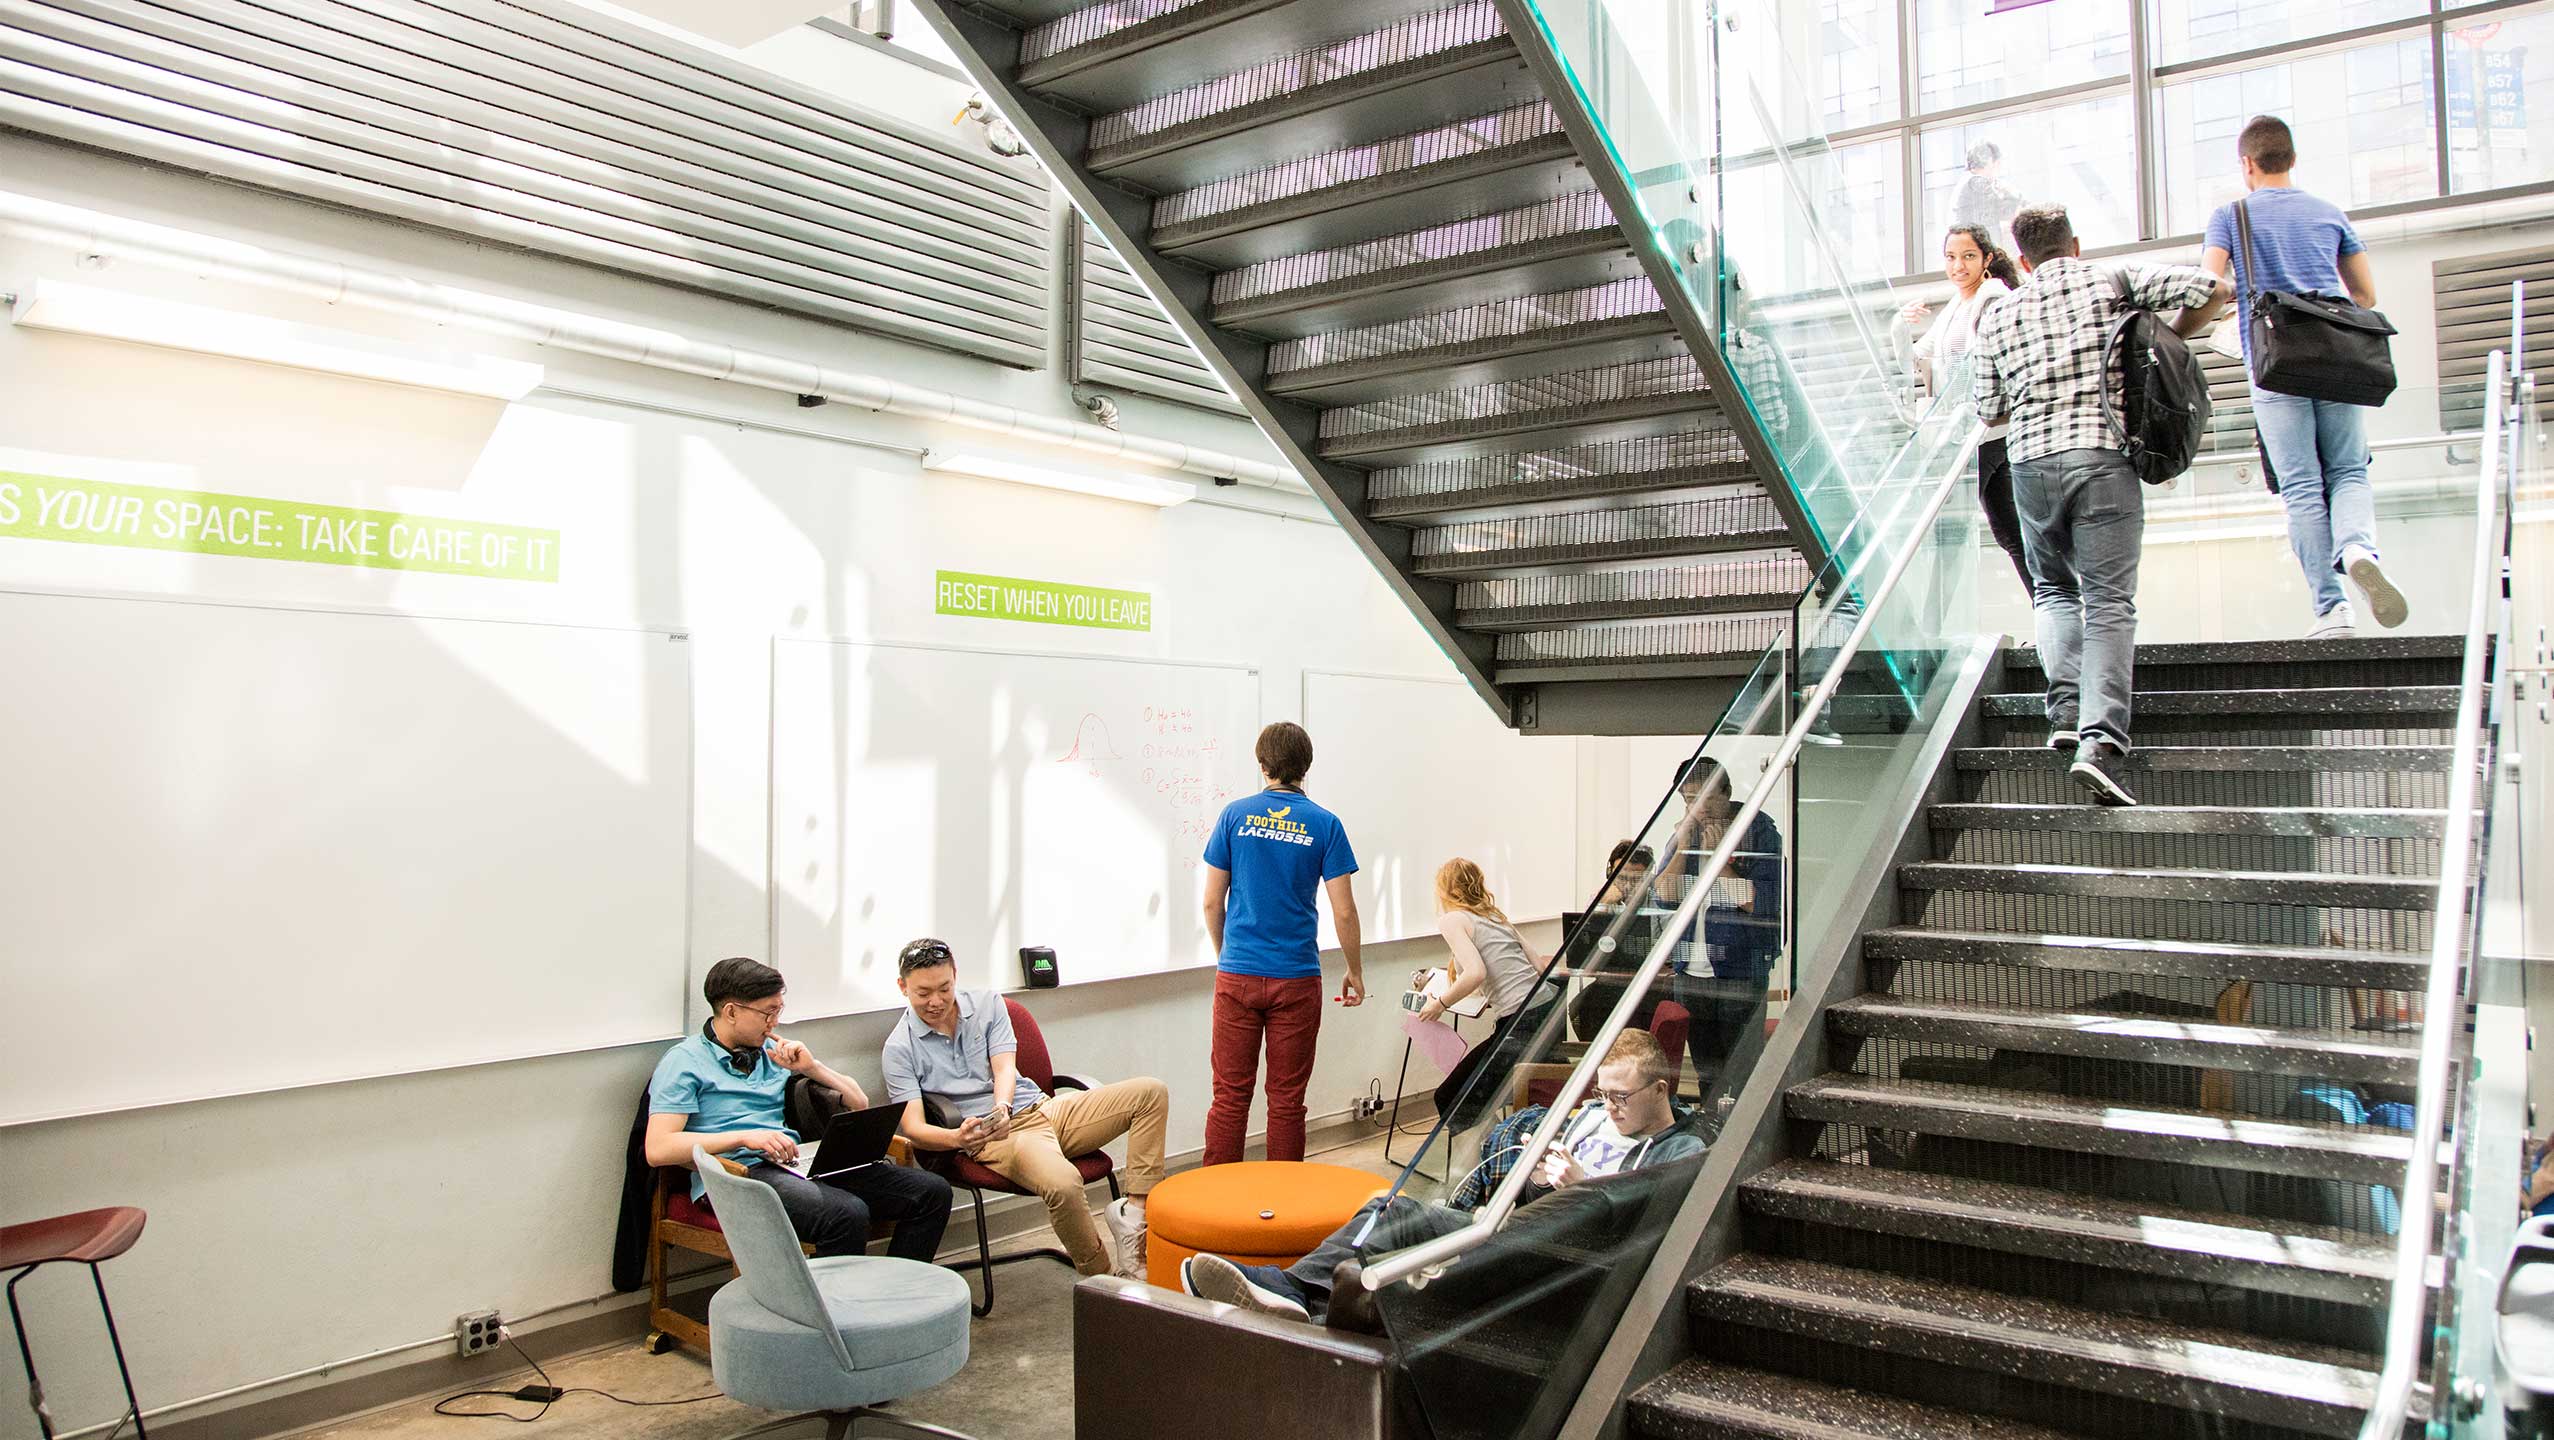 Students can be seen sitting in a lounge and walking up the steps within the Jacobs building.